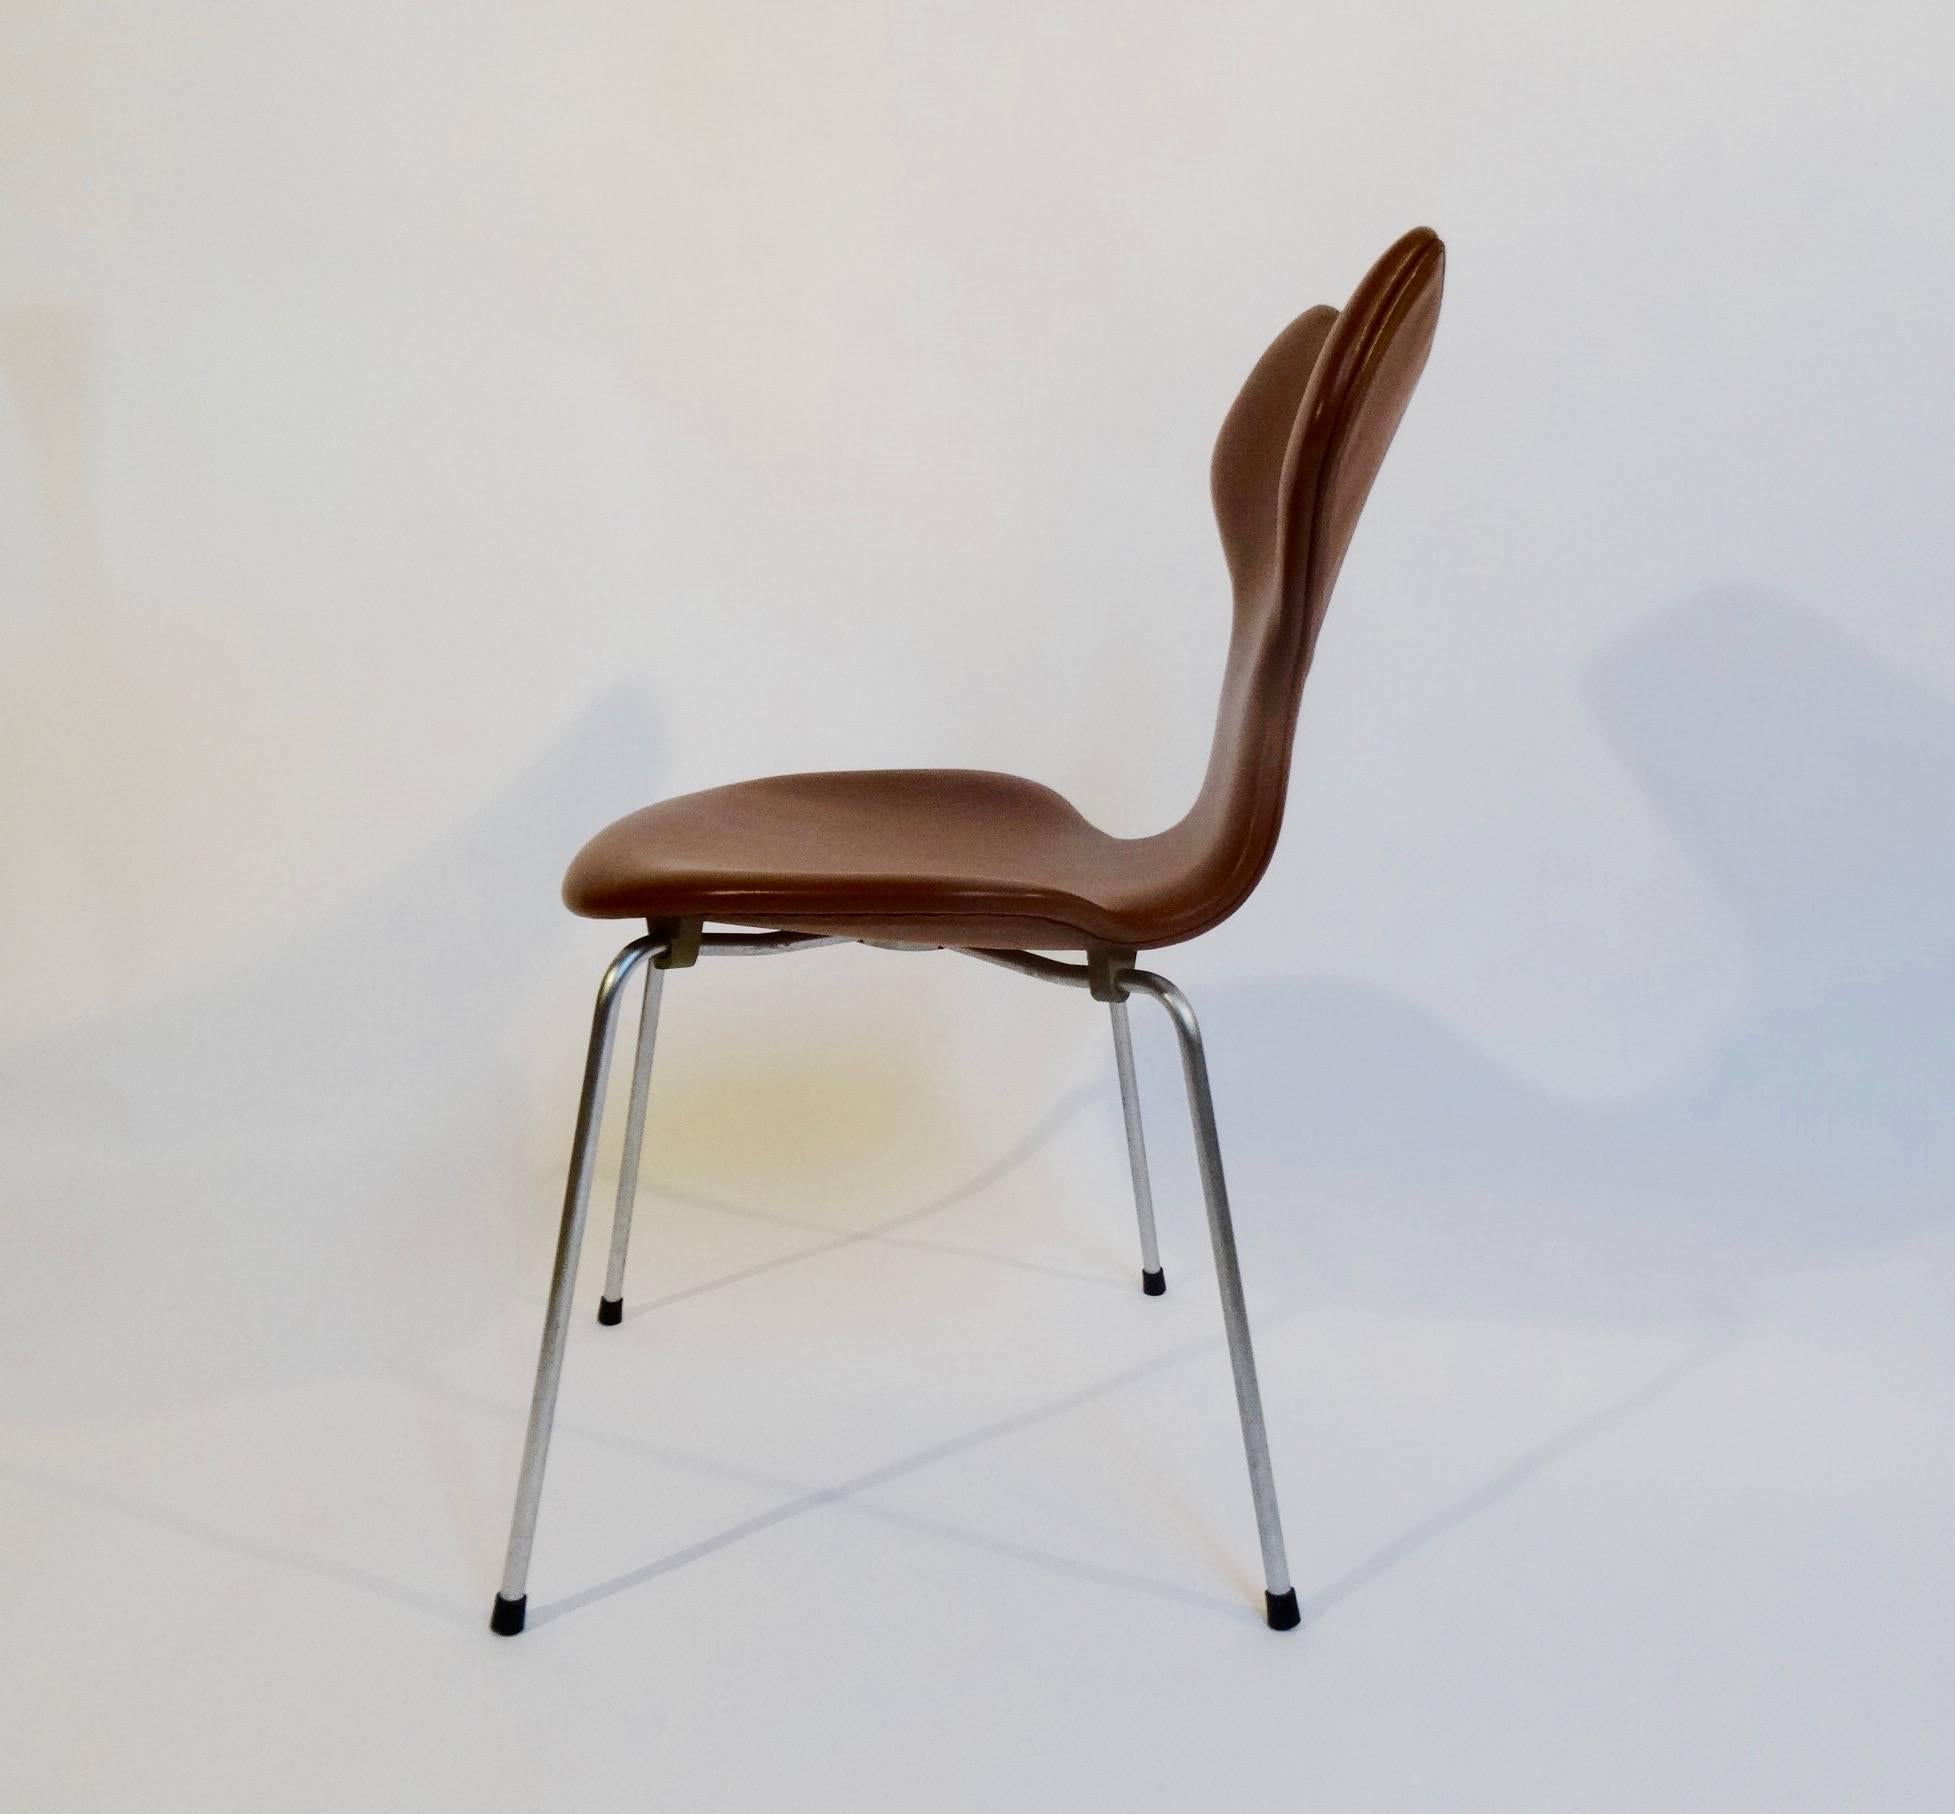 The iconic Grand Prix chair (3130) was introduced by Arne Jacobsen in 1957. This chair was manufactured in October 1964. Re-upholstered with high quality cognac colored anilin leather.